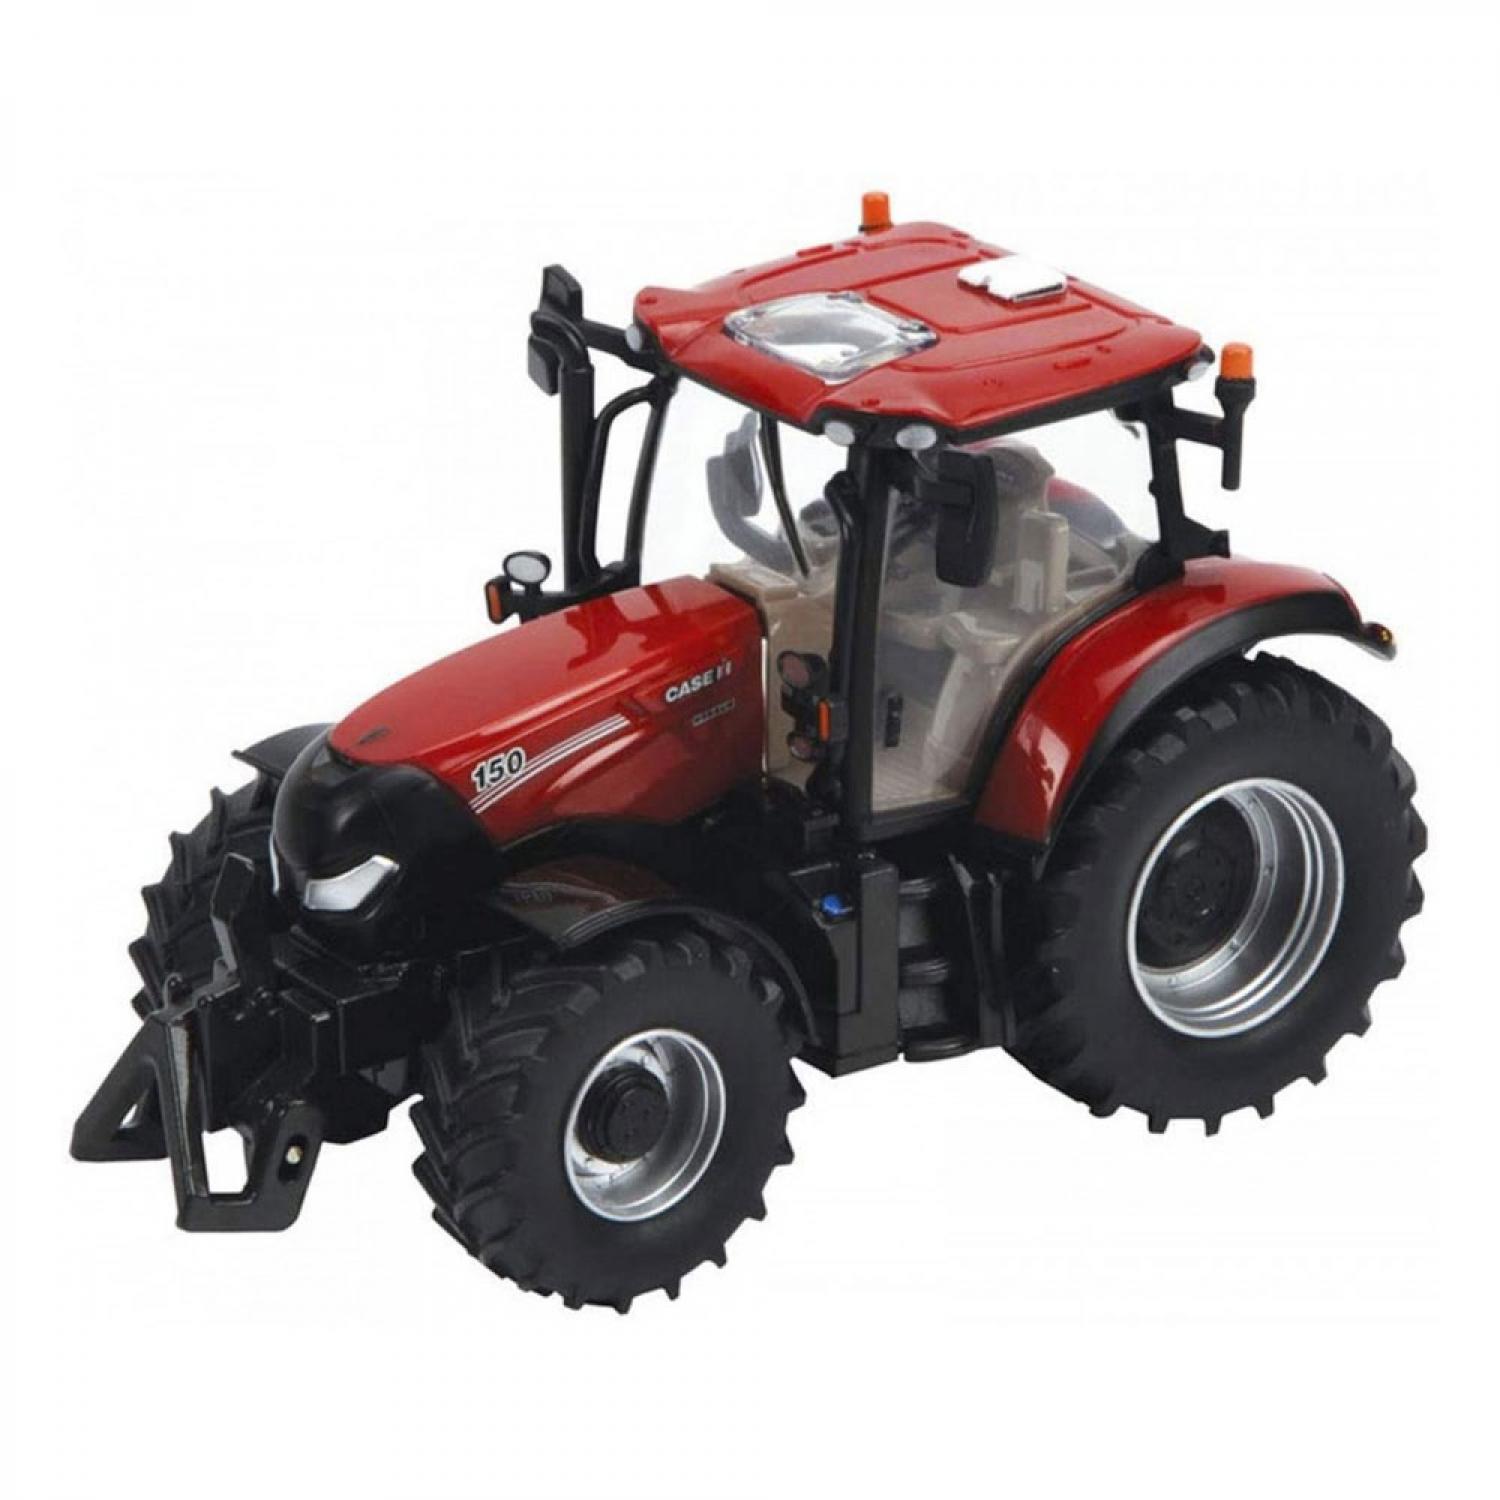 Buy Britains 43291 Case Maxxum 150 Tractor From Fane Valley Stores Agricultural Supplies 0775